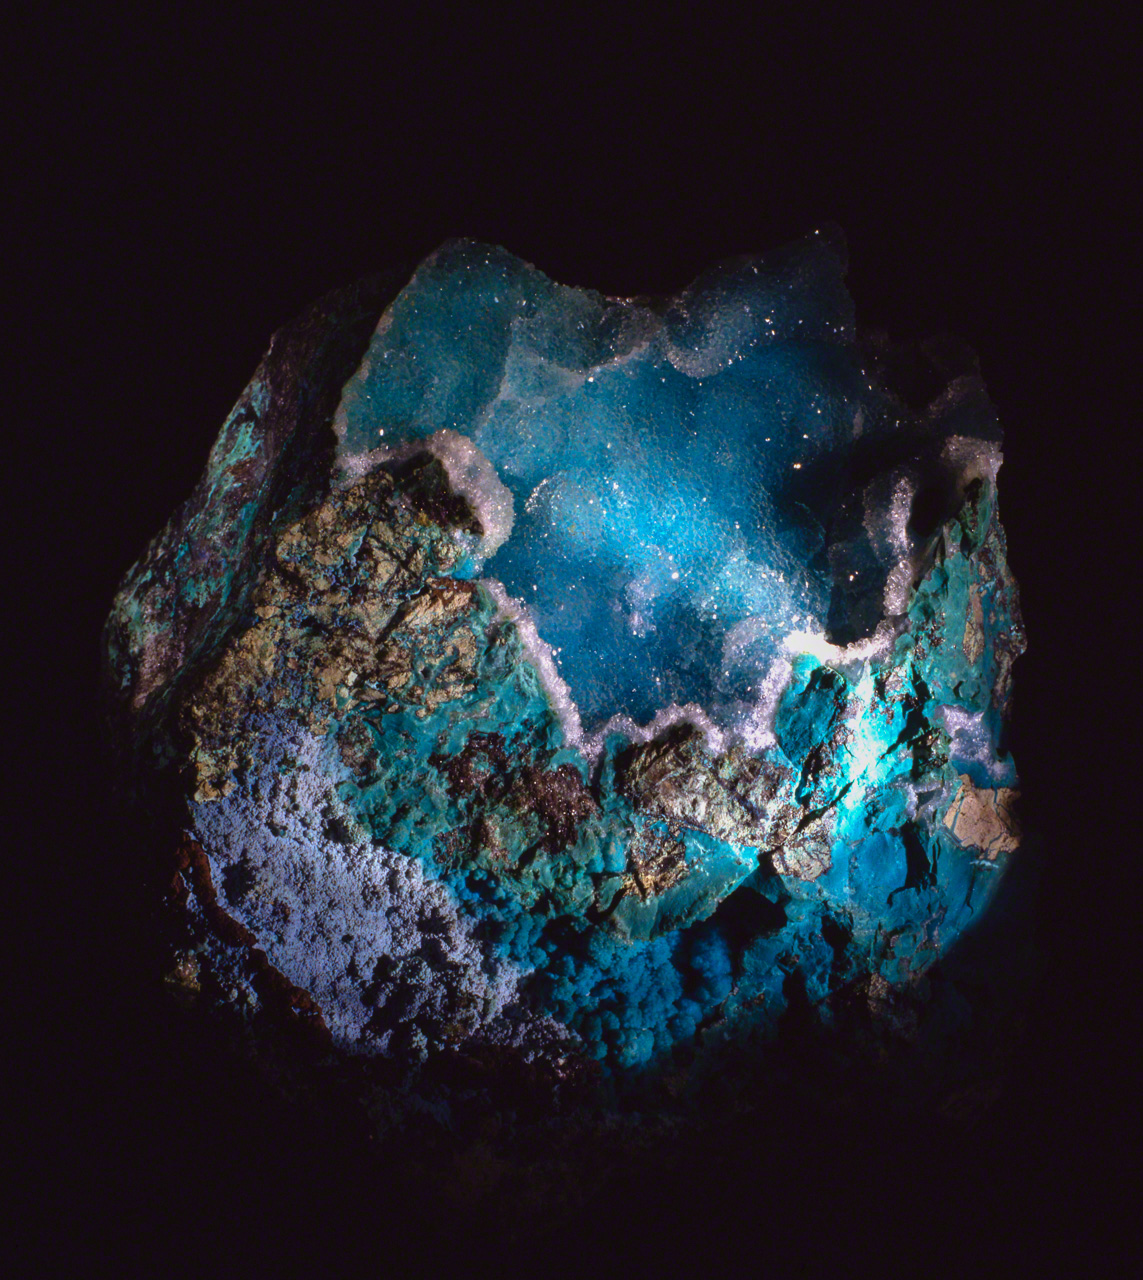 Chrysocolla is a mysterious mineral that can sometimes bear a strange resemblance to images of our blue, watery planet of earth seen from space. (© Ōnishi Naruaki)